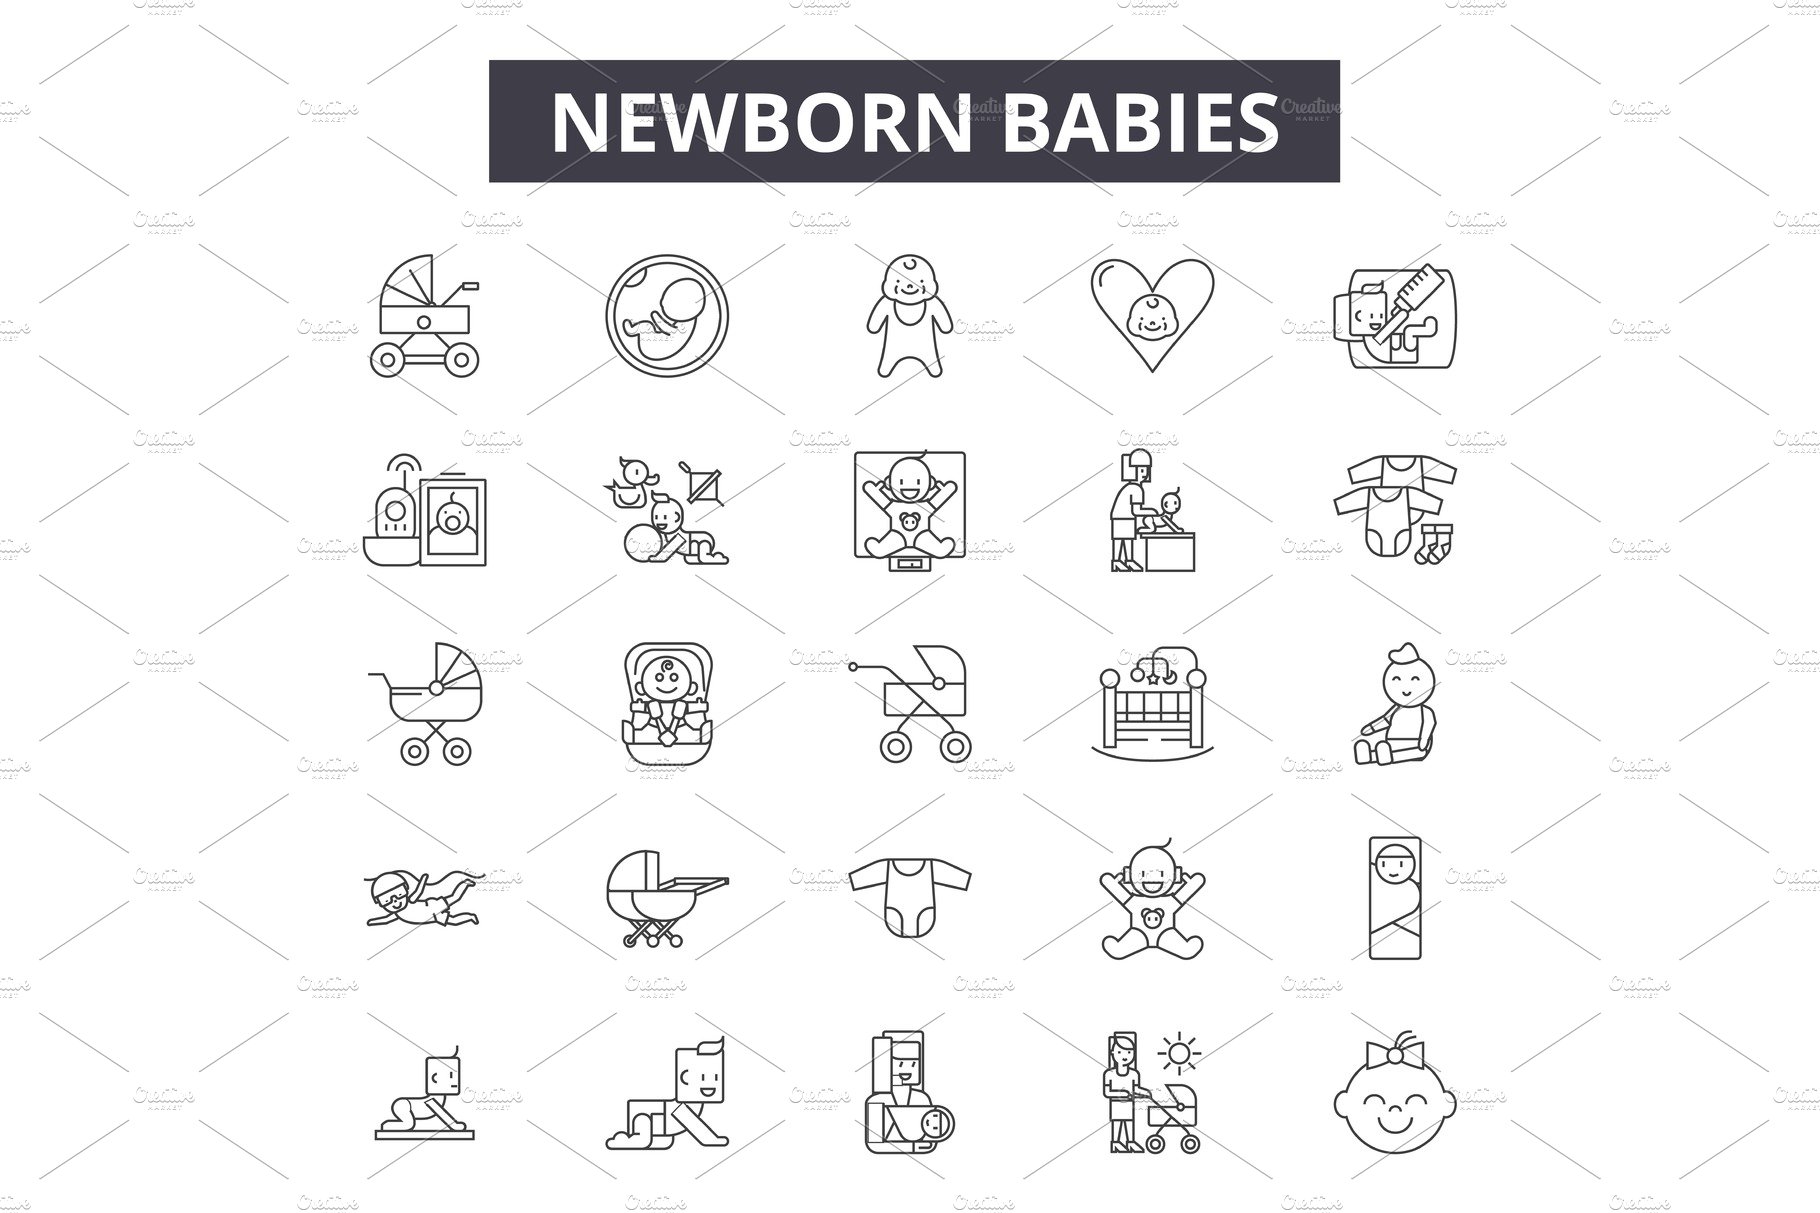 Newborn babies line icons, signs set cover image.